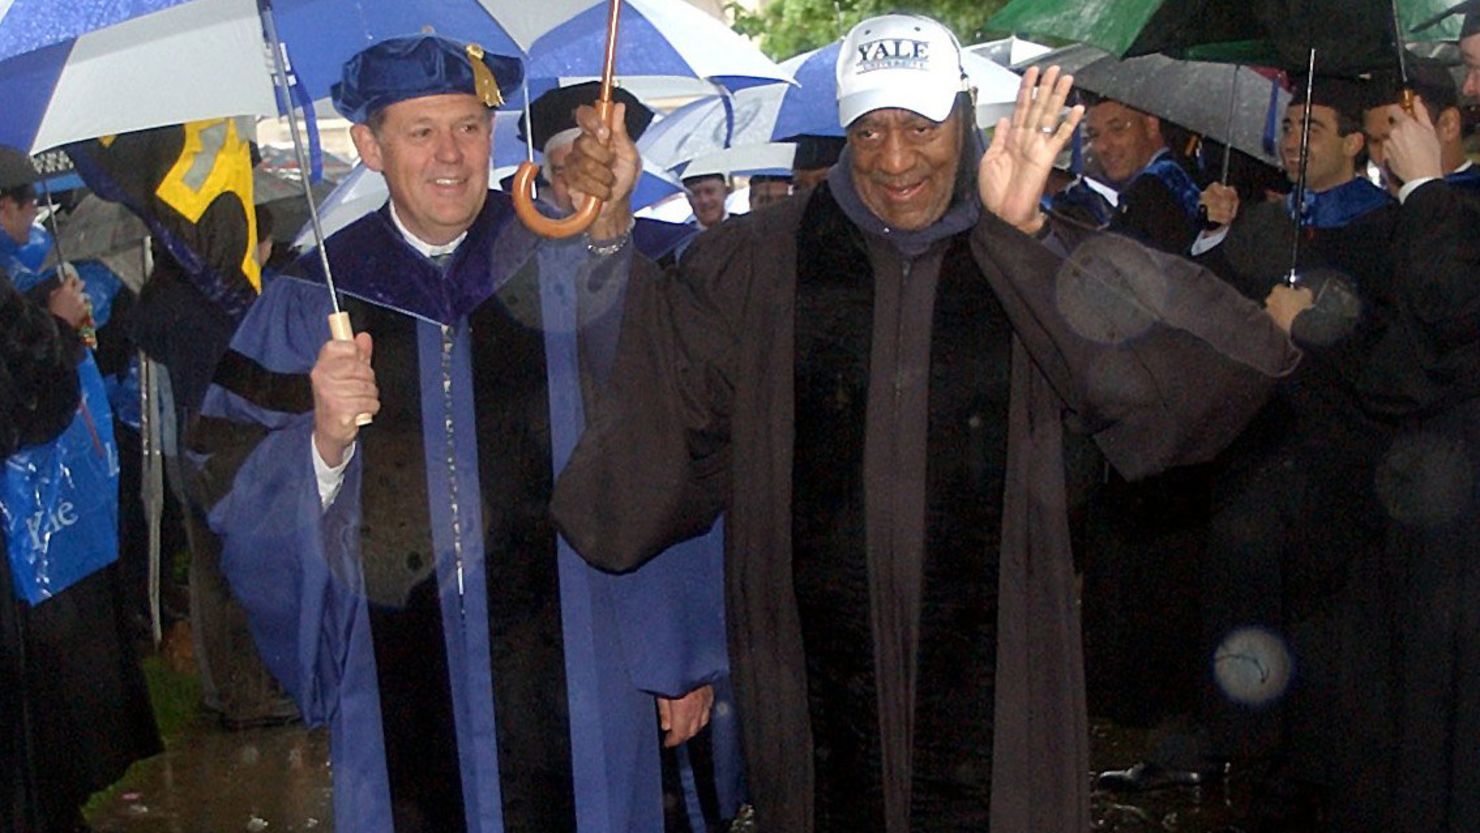 Bill Cosby, center right, waves to graduates as he walks in a rain-soaked academic procession on Yale University campus in New Haven, Conn., Monday, May 26, 2003, on the way to commencement ceremonies. Cosby was awarded an honorary Doctor of Humane Letters degree by Yale during the rain-shortened ceremony. (AP Photo/Bob Child)